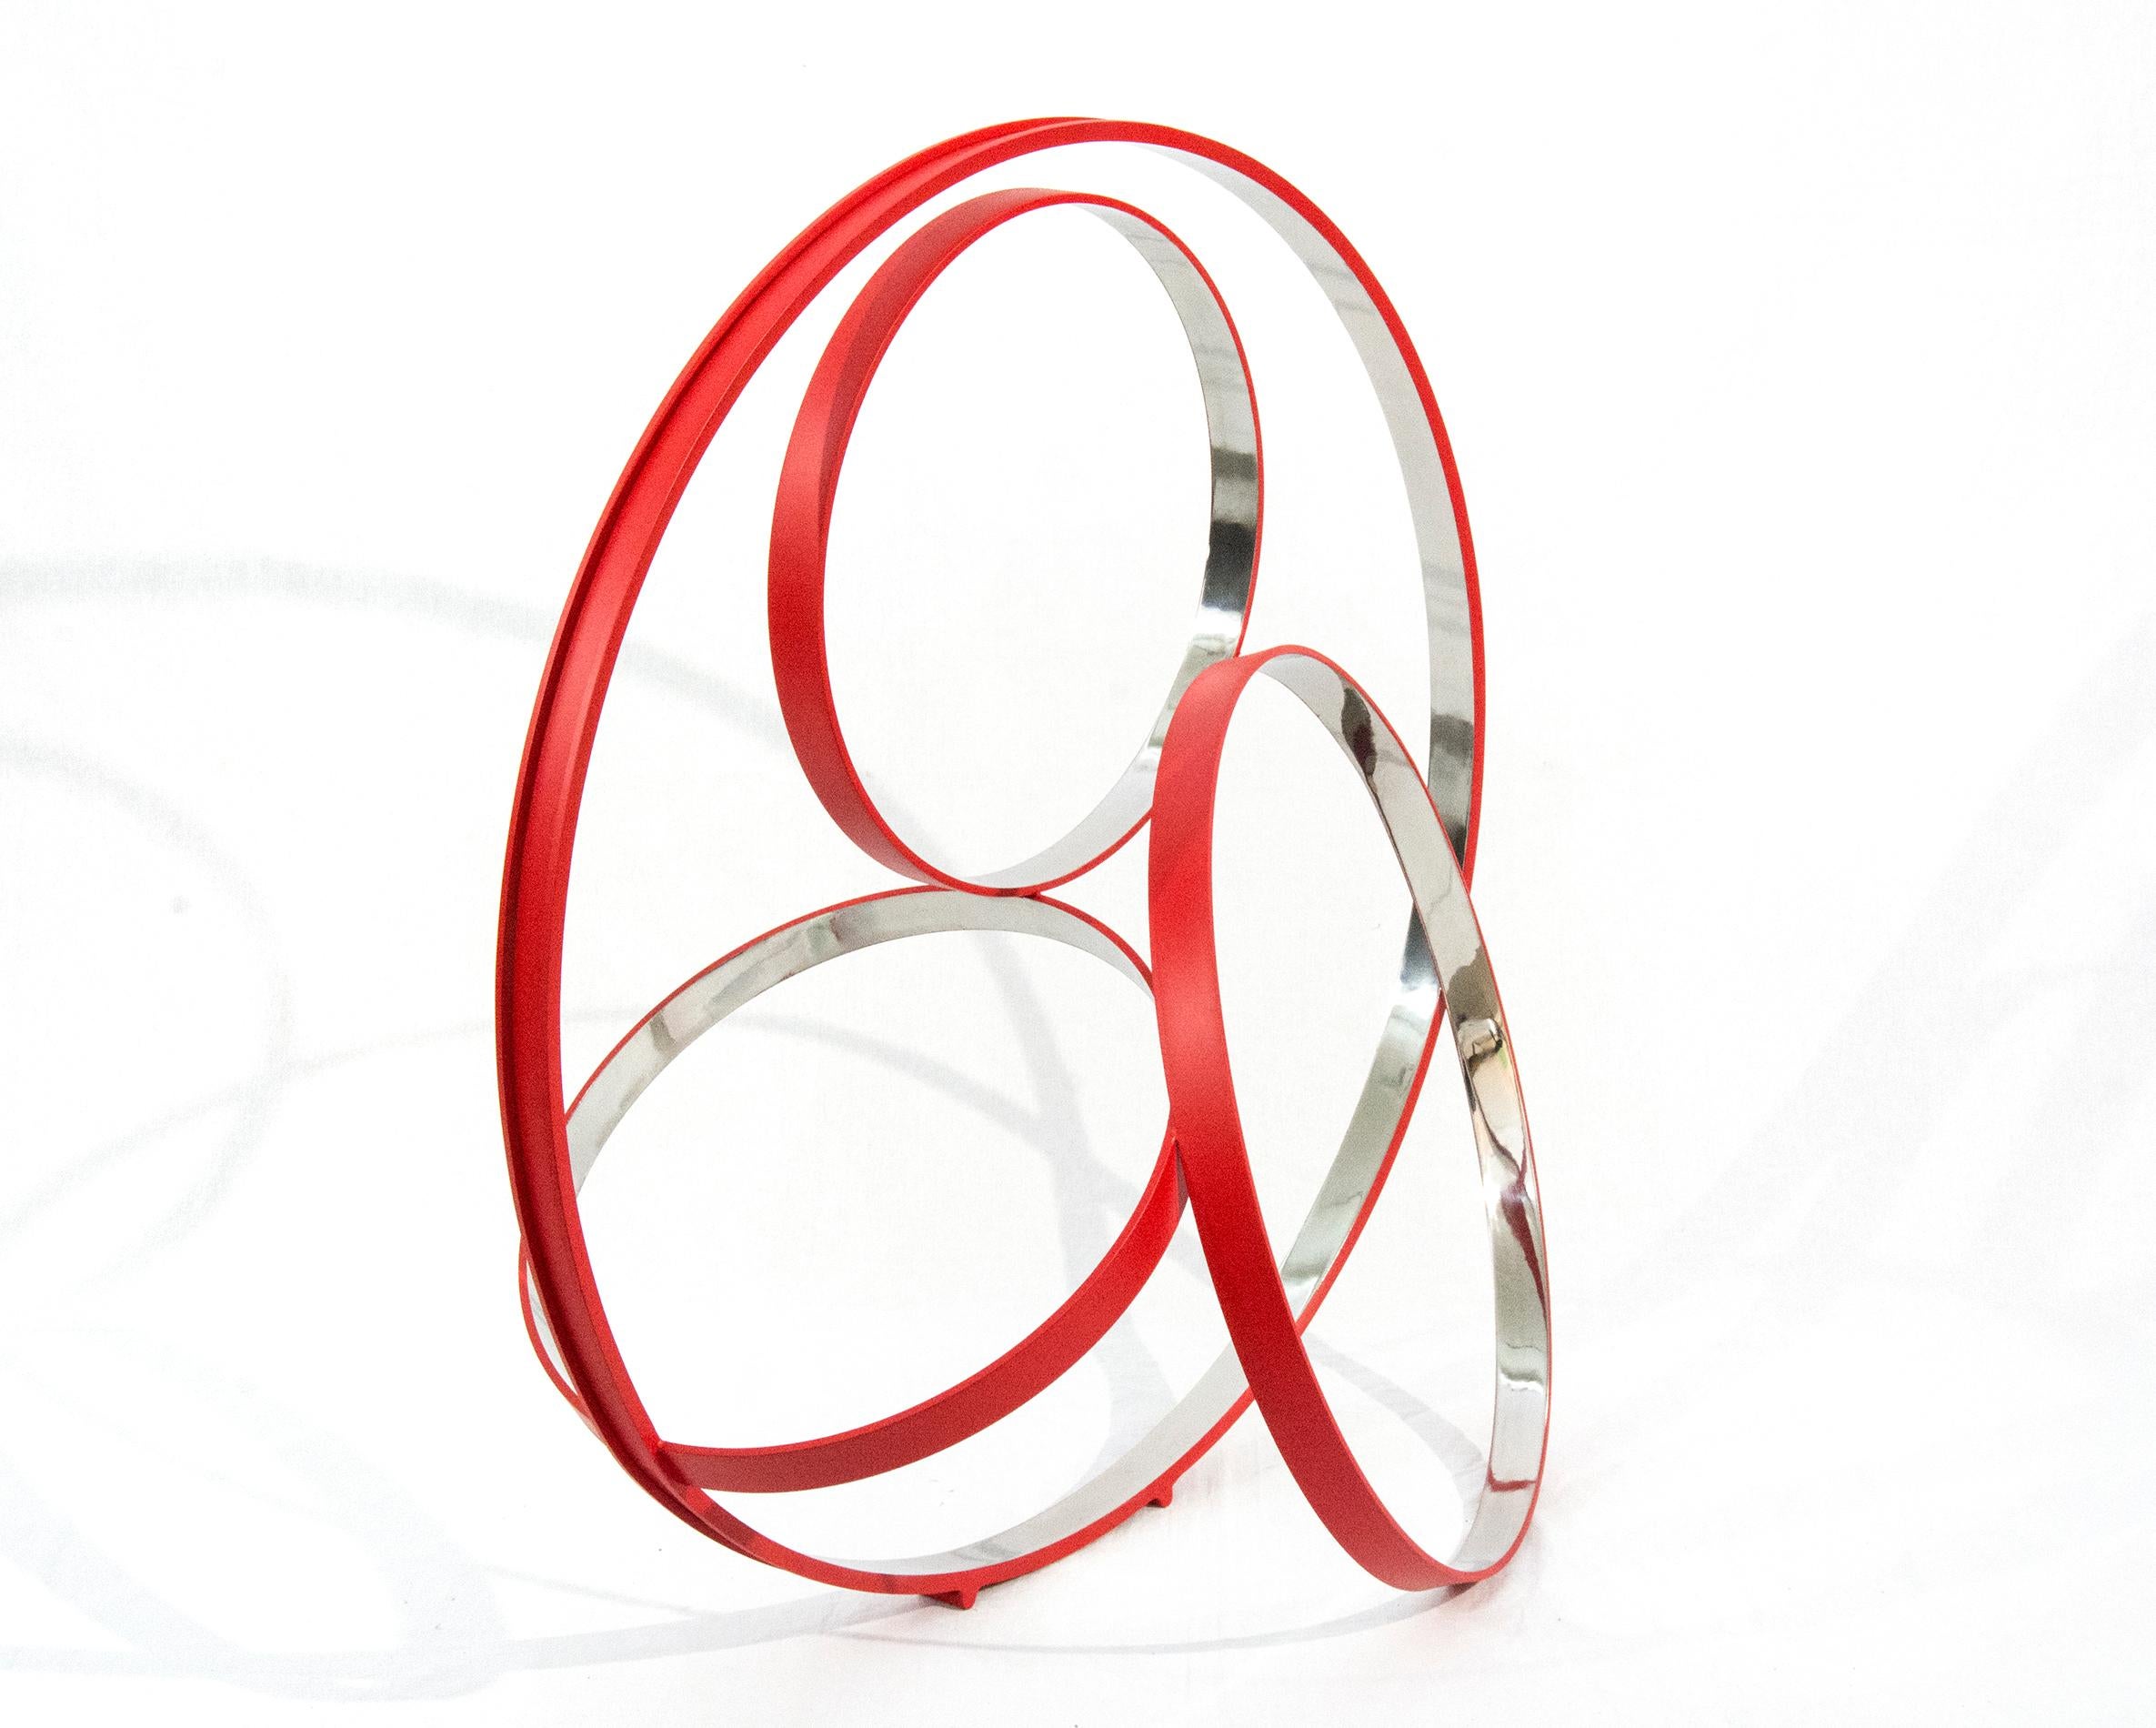 Large Temps Zero Red 4/10 - contemporary, large ring, aluminum sculpture - Abstract Geometric Sculpture by Philippe Pallafray